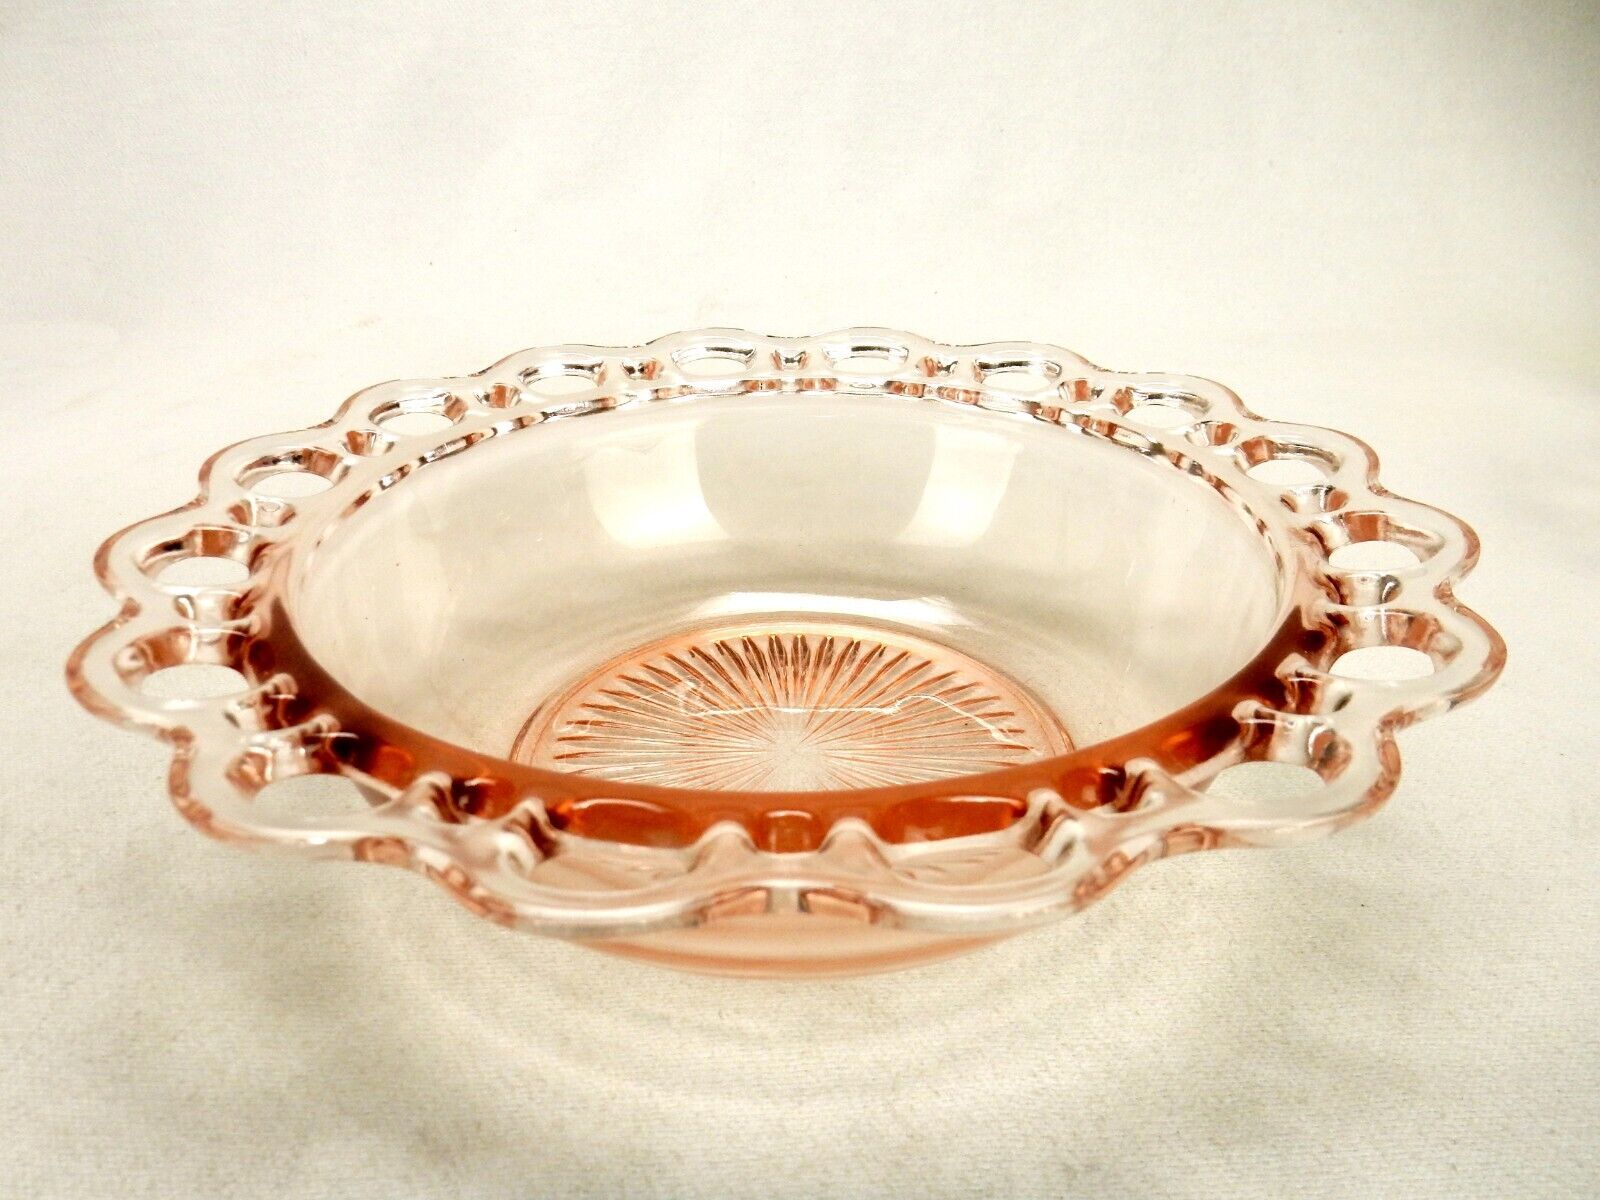 Primary image for Anchor Hocking Serving Bowl, Old Colony Open Lace, Vintage Pink Depression Glass